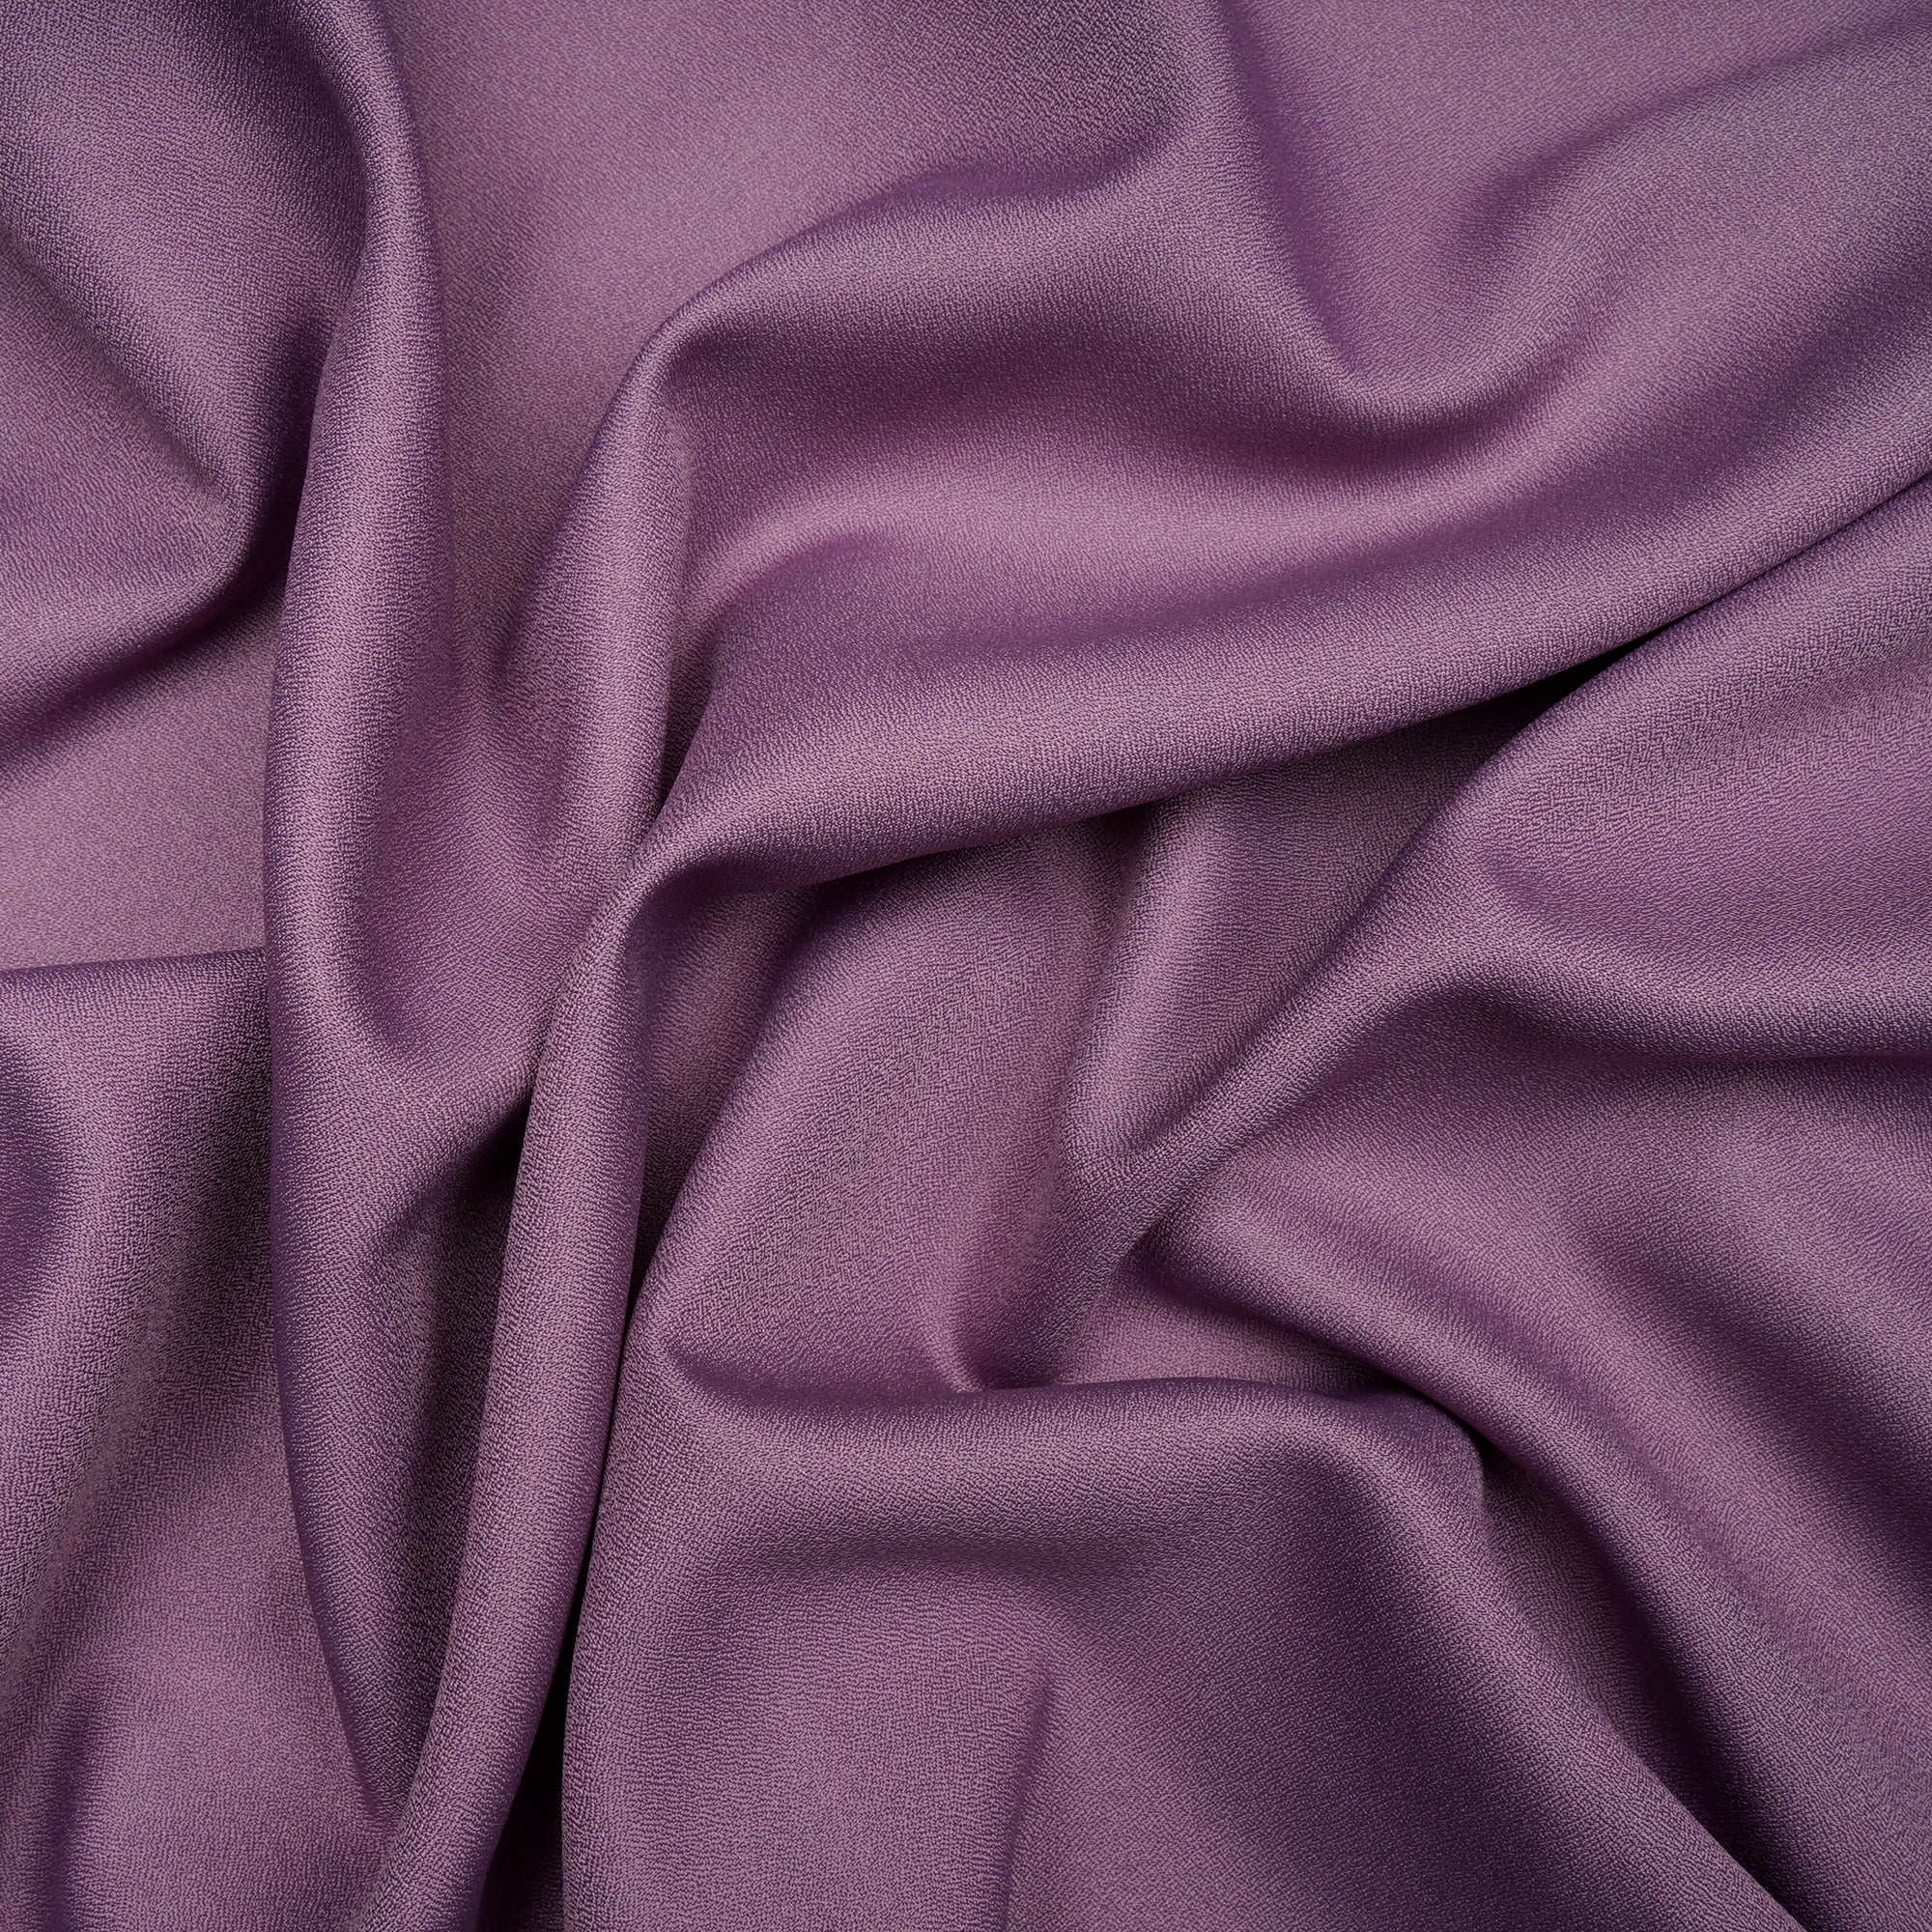 Grape Shake Solid Dyed Imported Amazon Moss Crepe Fabric (60" Width)